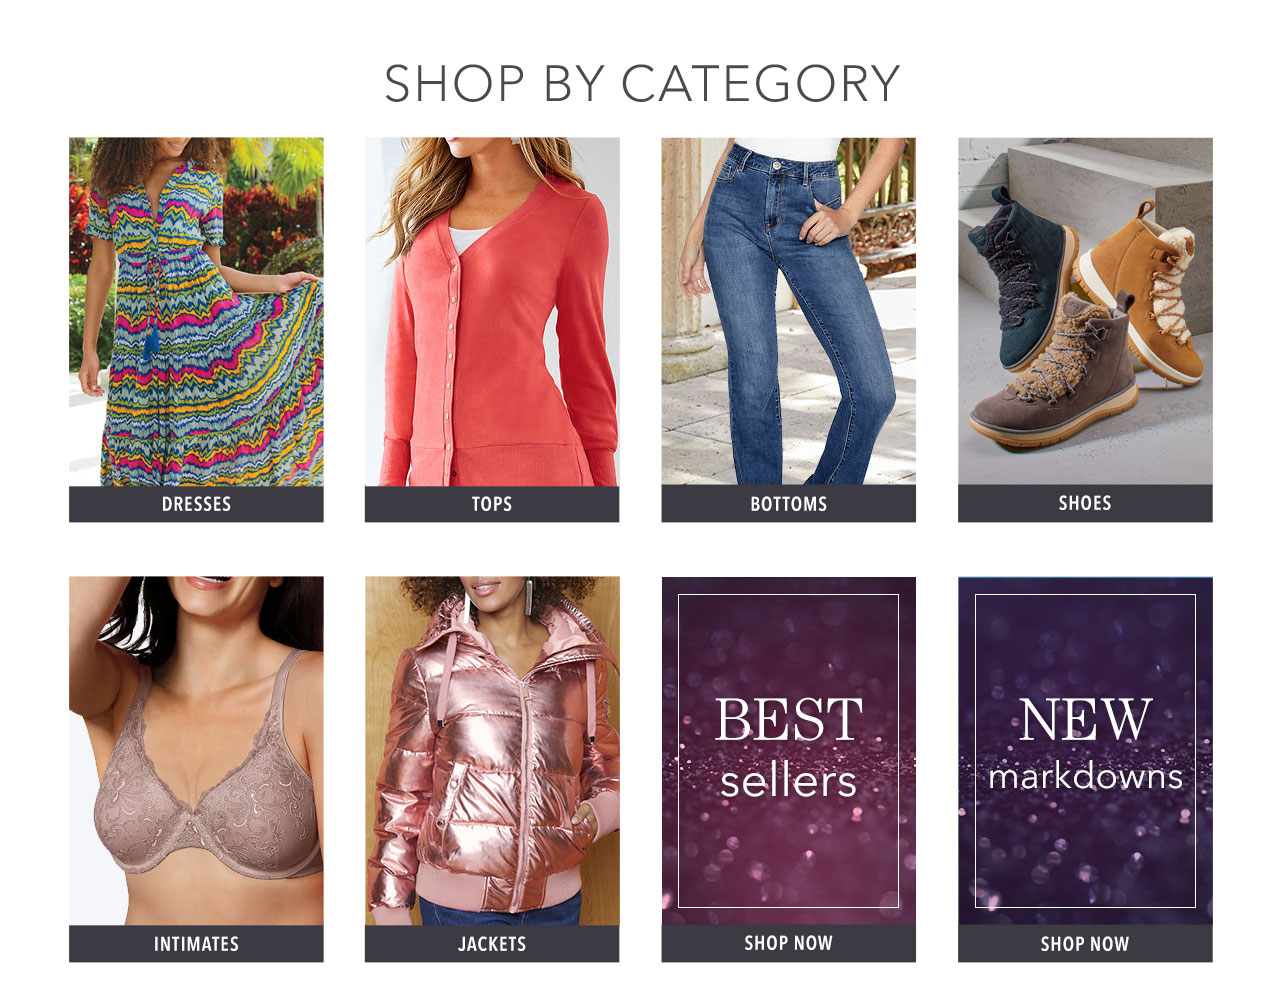 Shop dresses, tops, bottoms, shoes, matching sets, intimates, best sellers, and clearance.